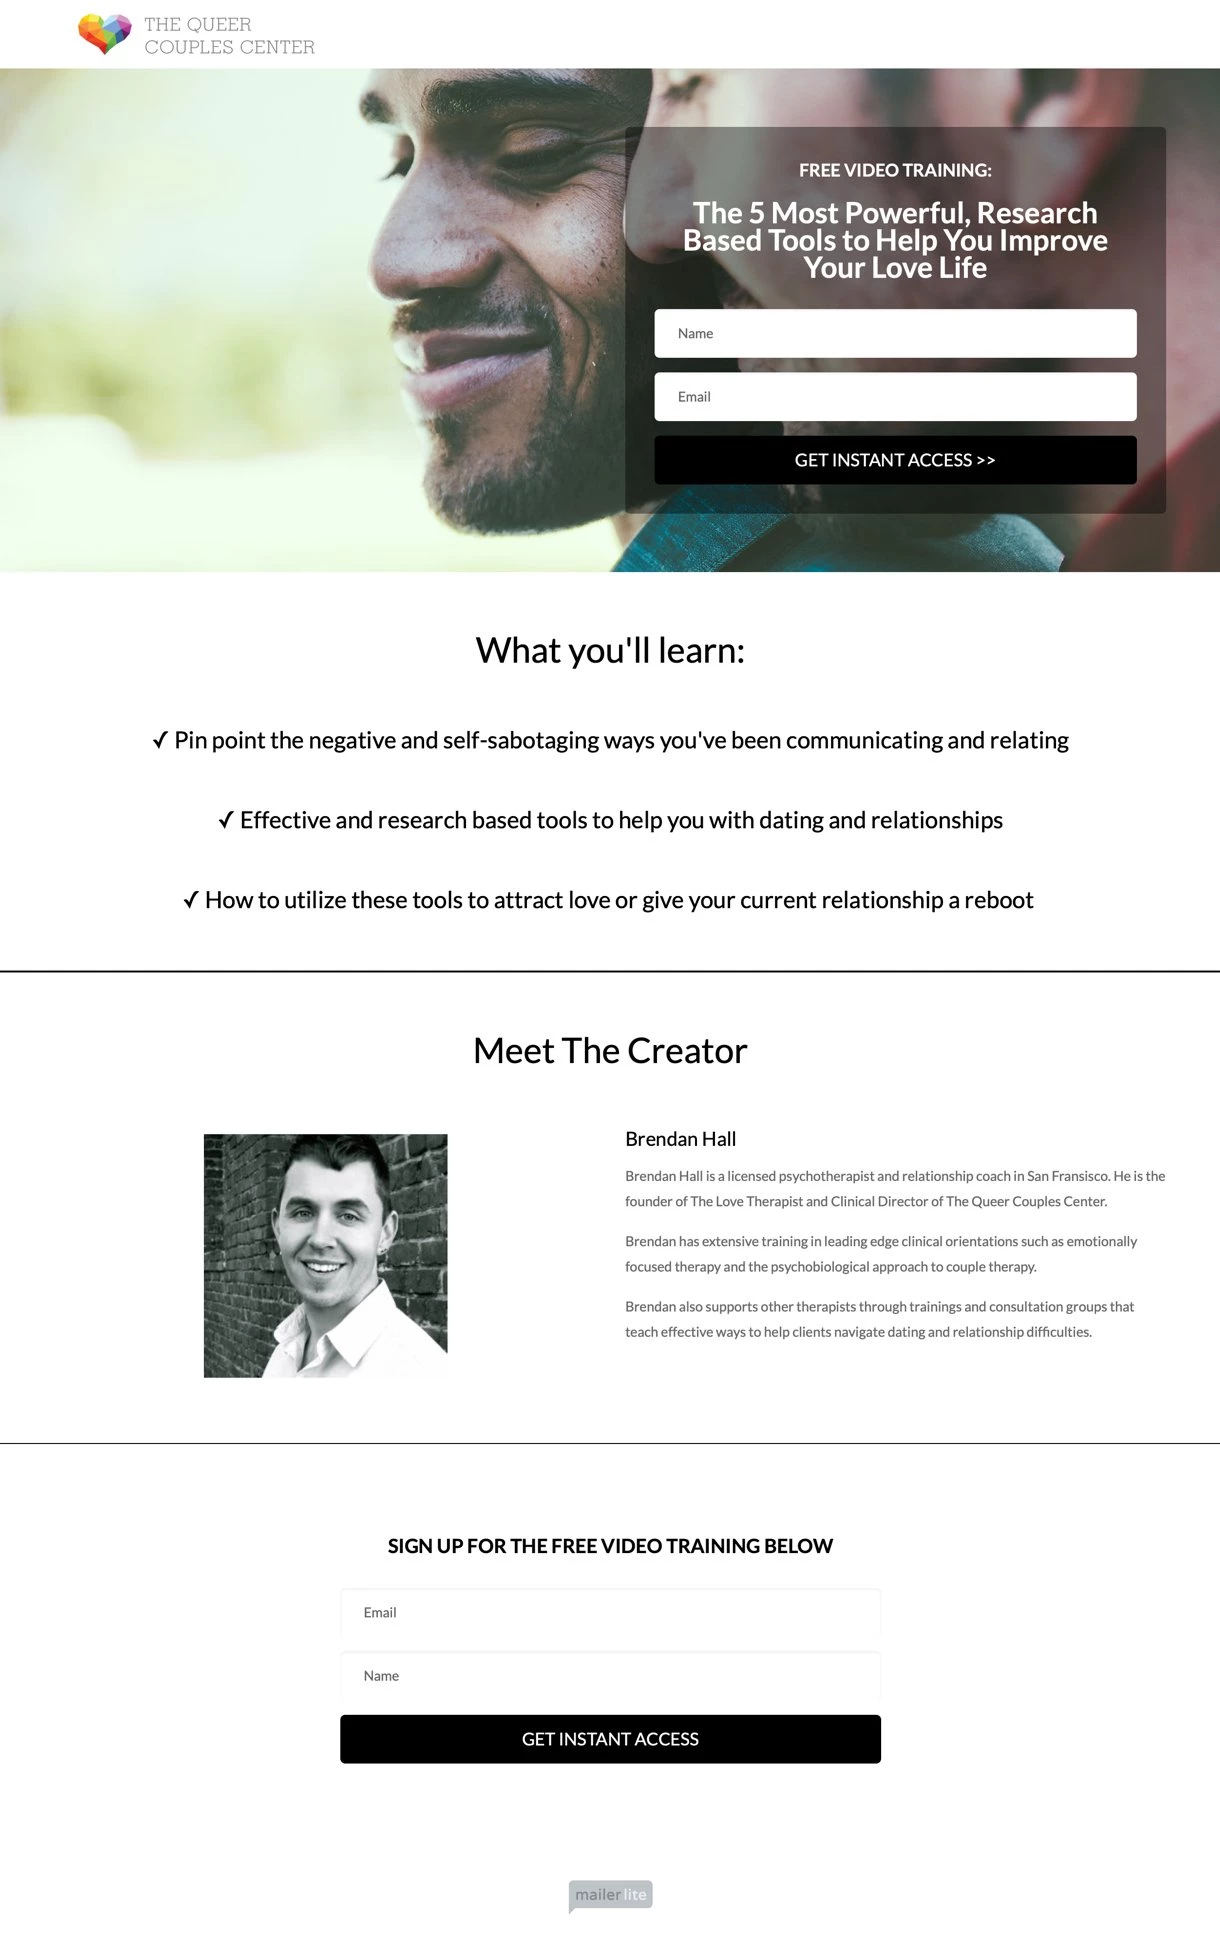 The Queer Couples Center video series landing page built with - MailerLite